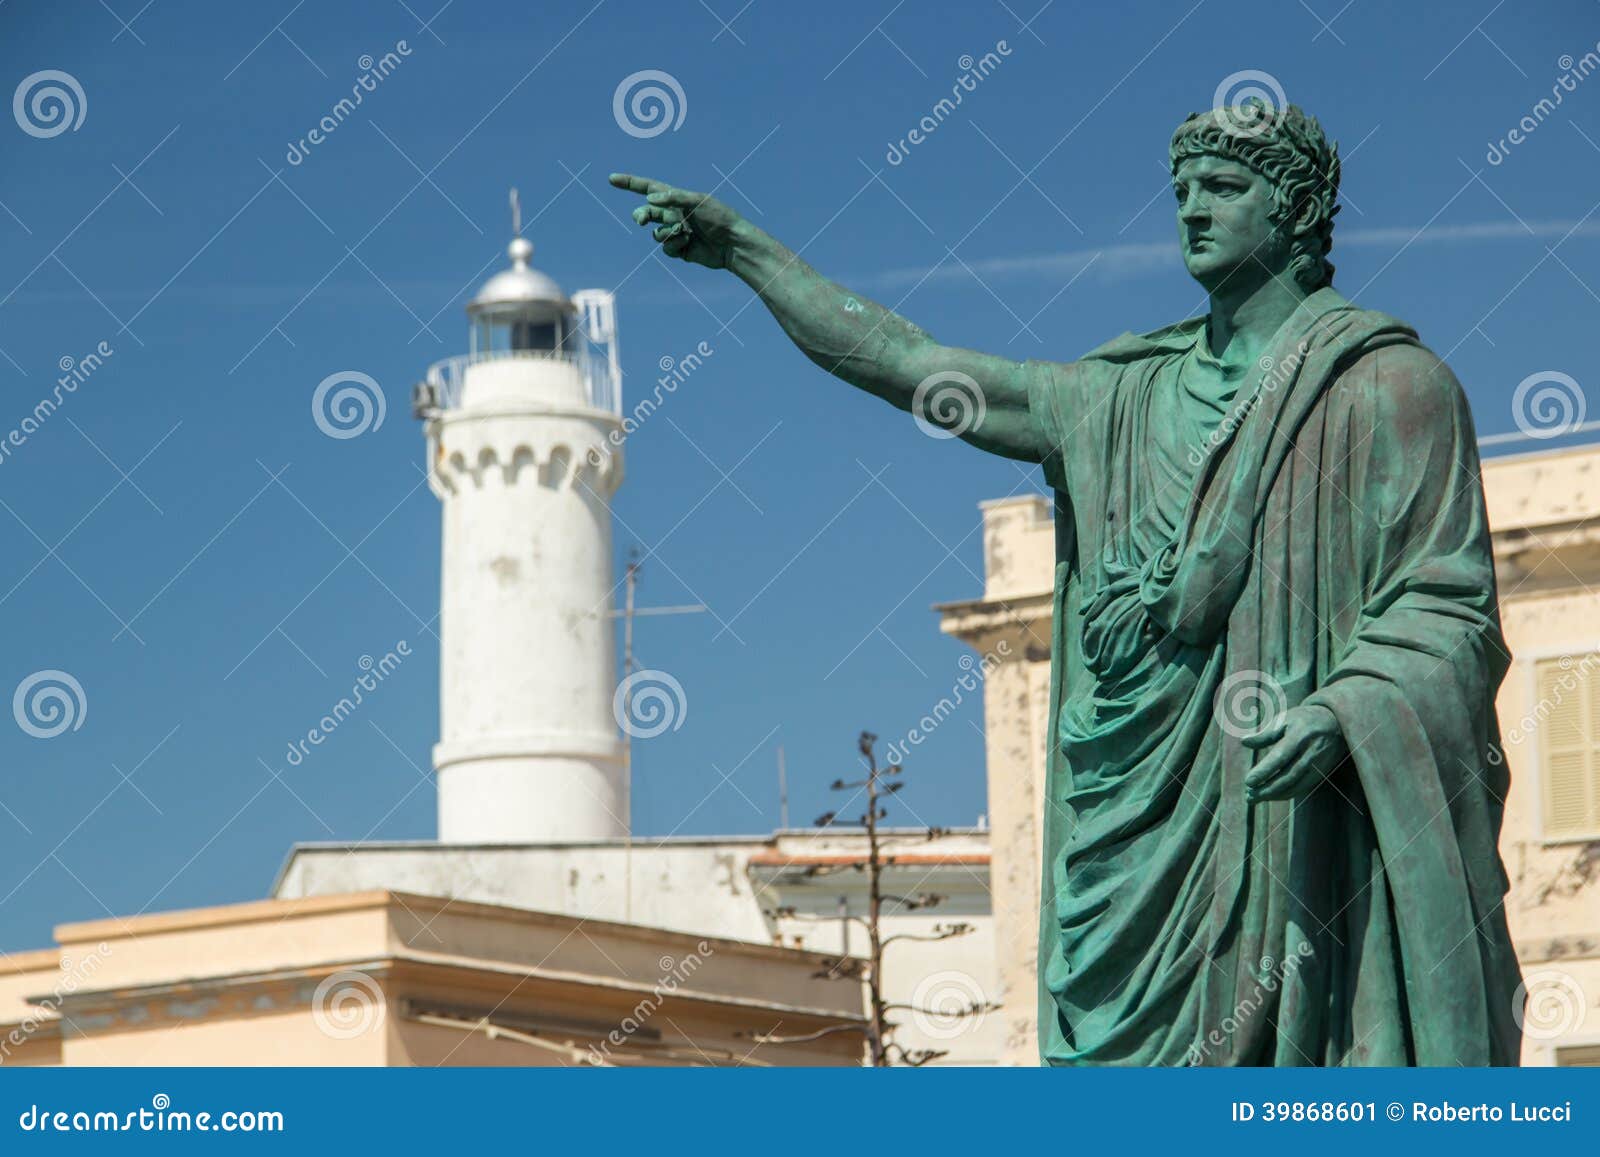 nero statue and lighthouse in anzio, italy